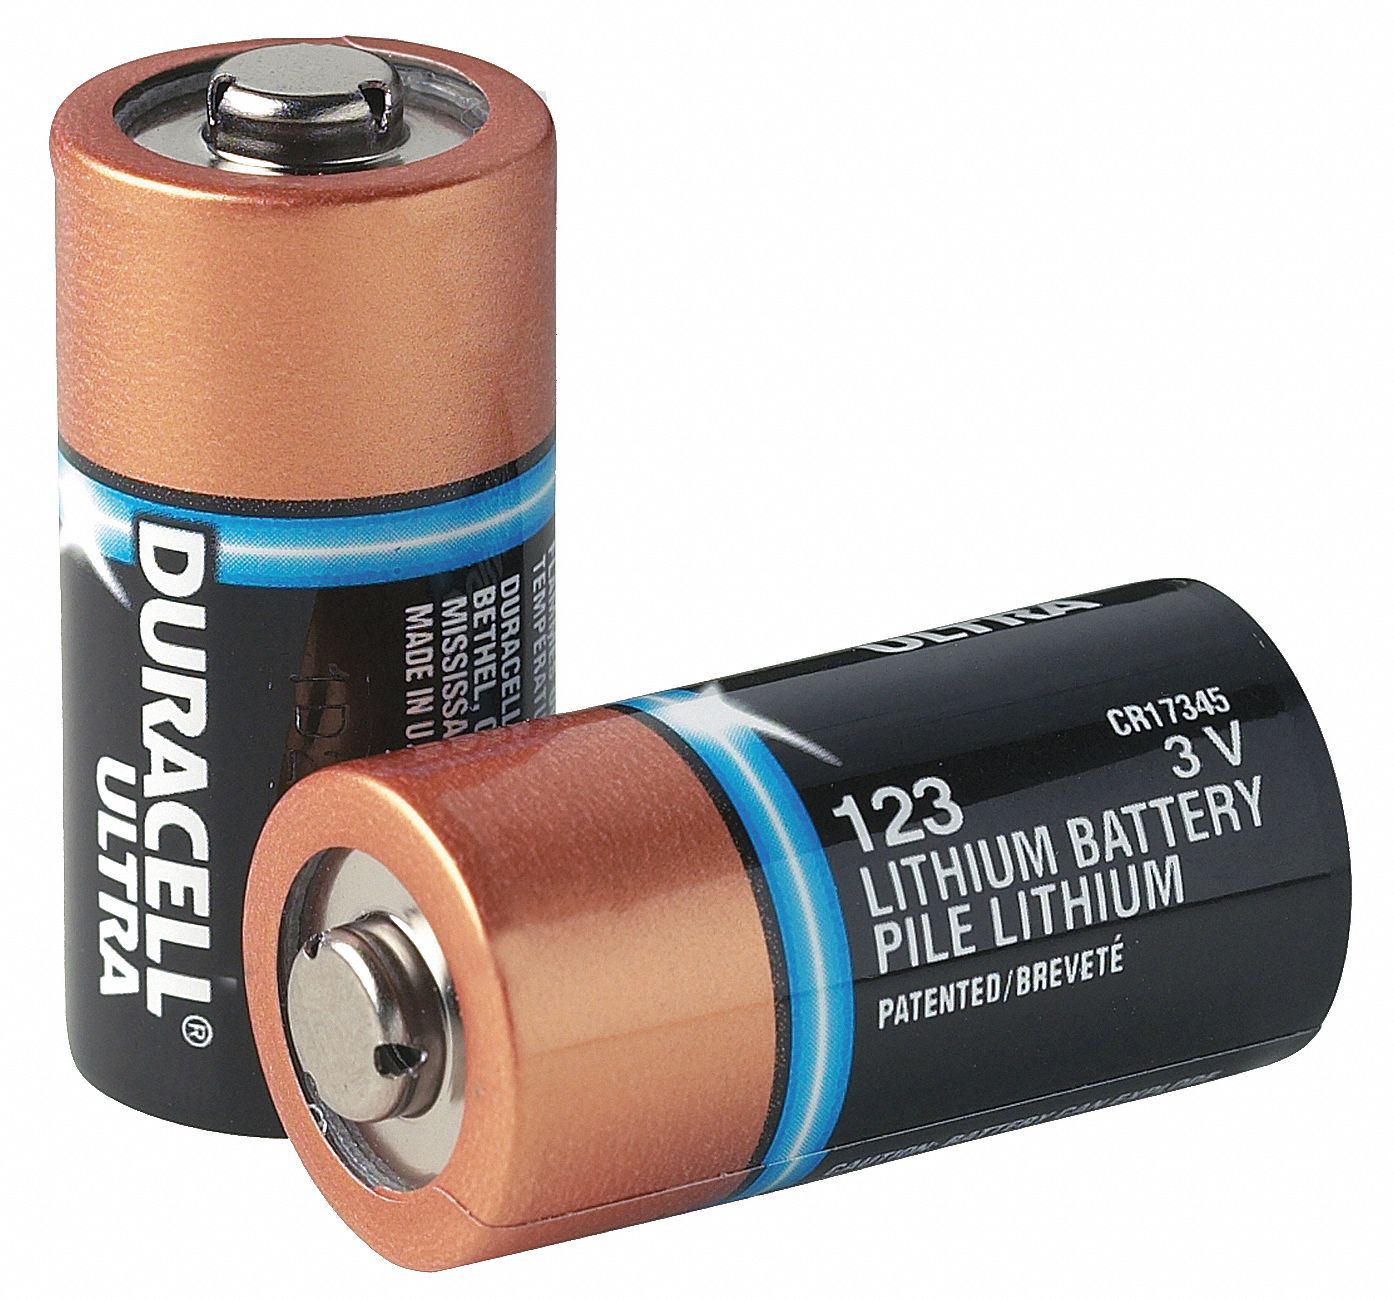 Does Duracell Make Car Batteries